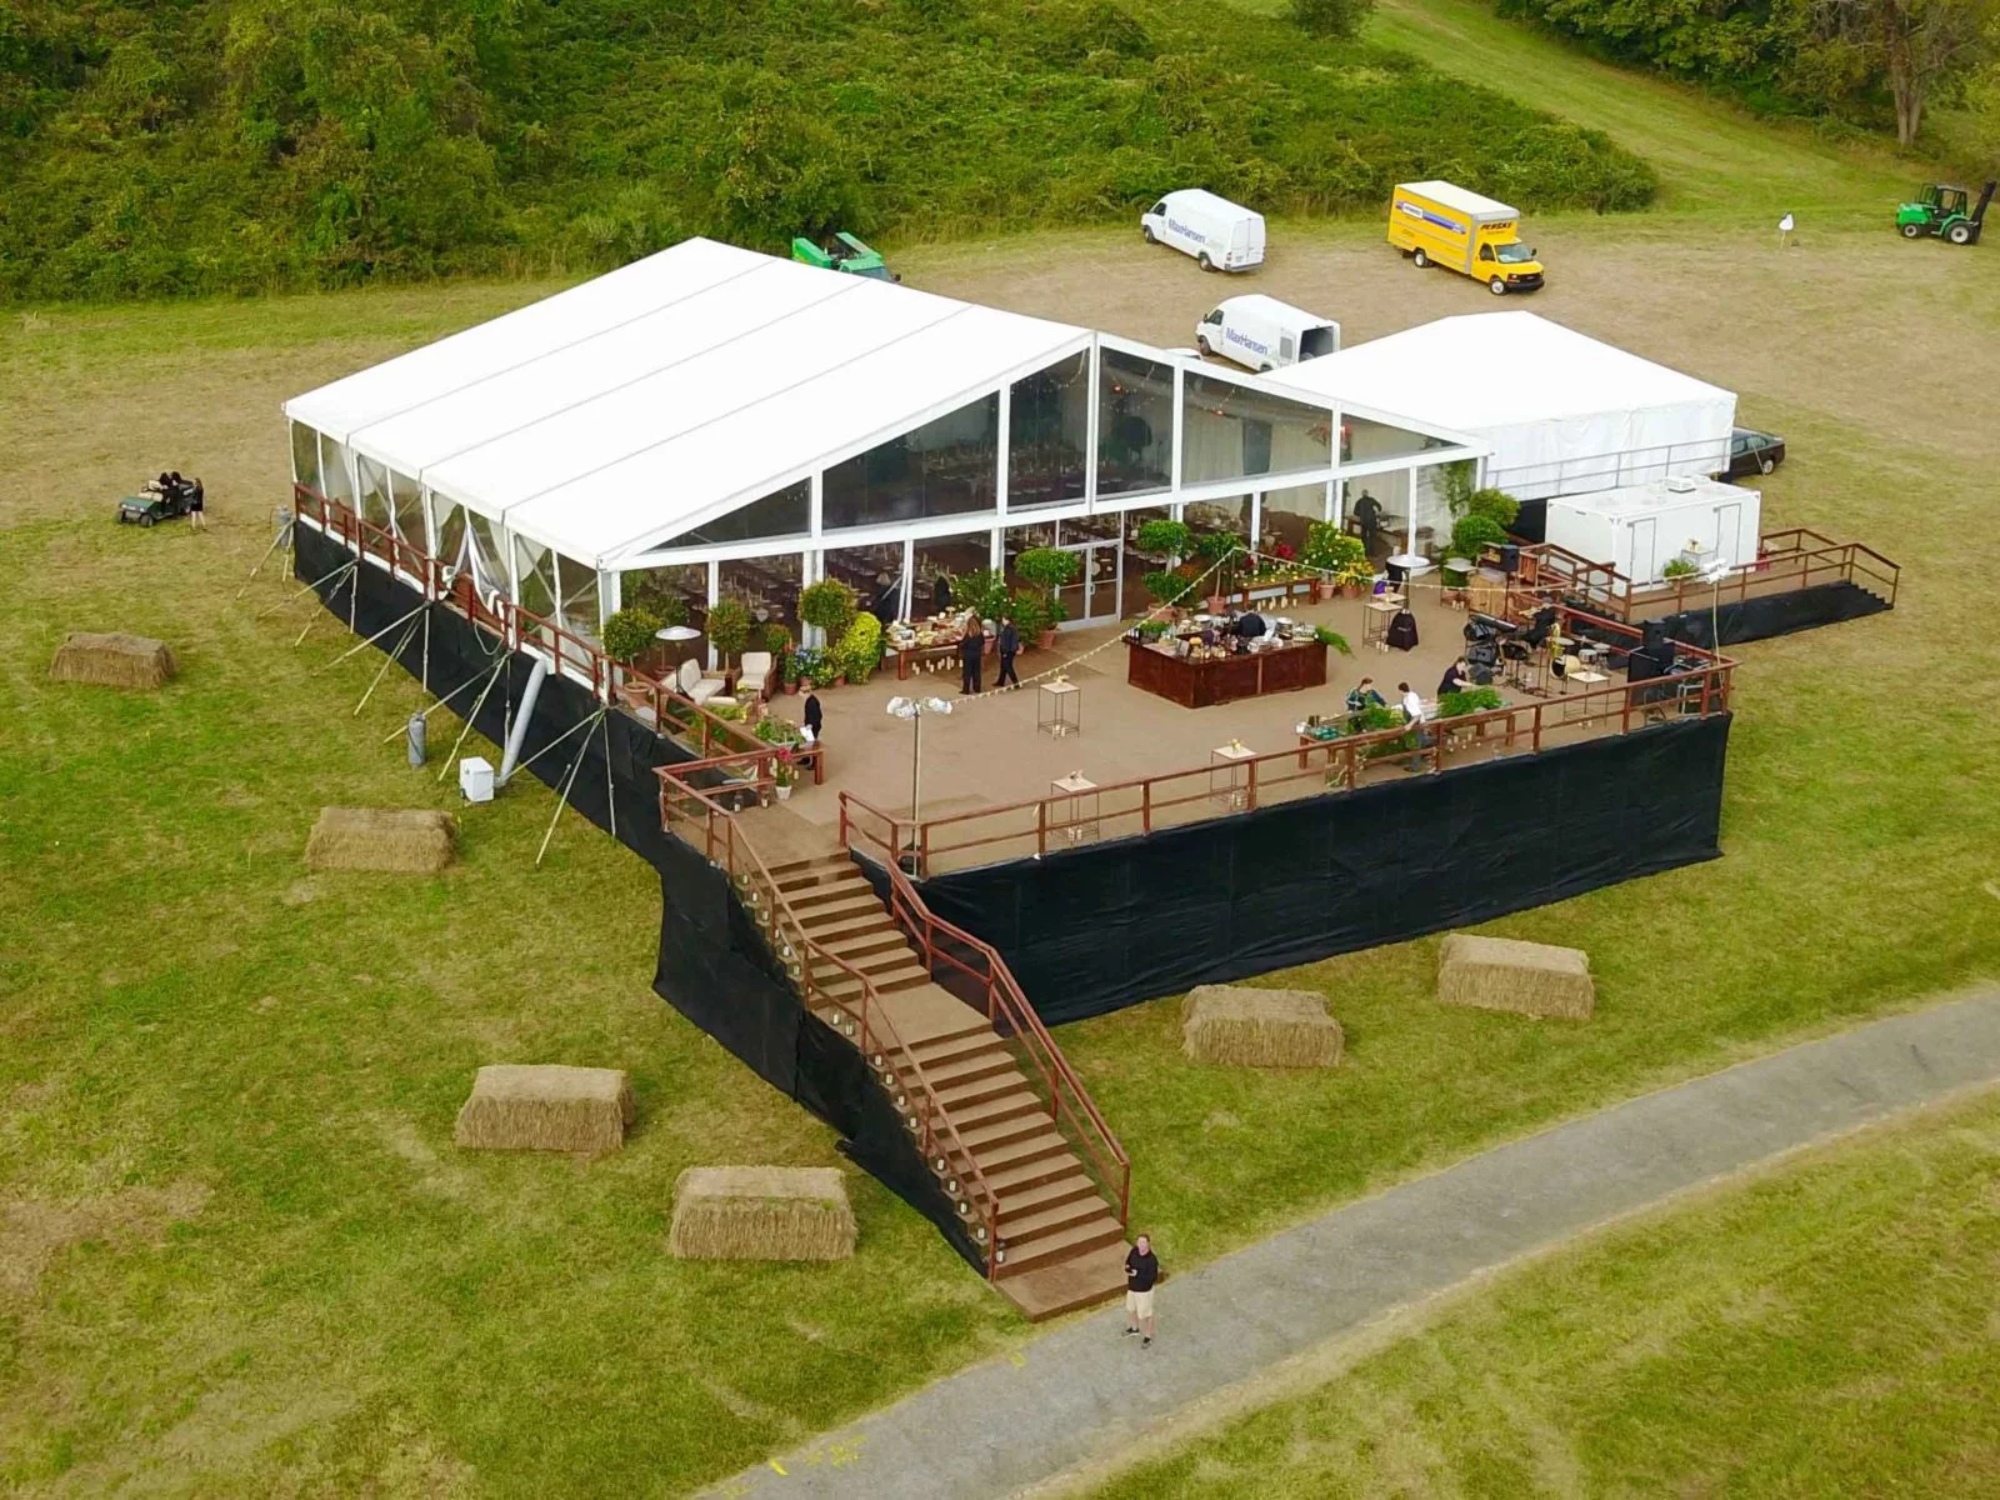 Temporary Aluminum Structure Meeting Tents for sale for Wedding